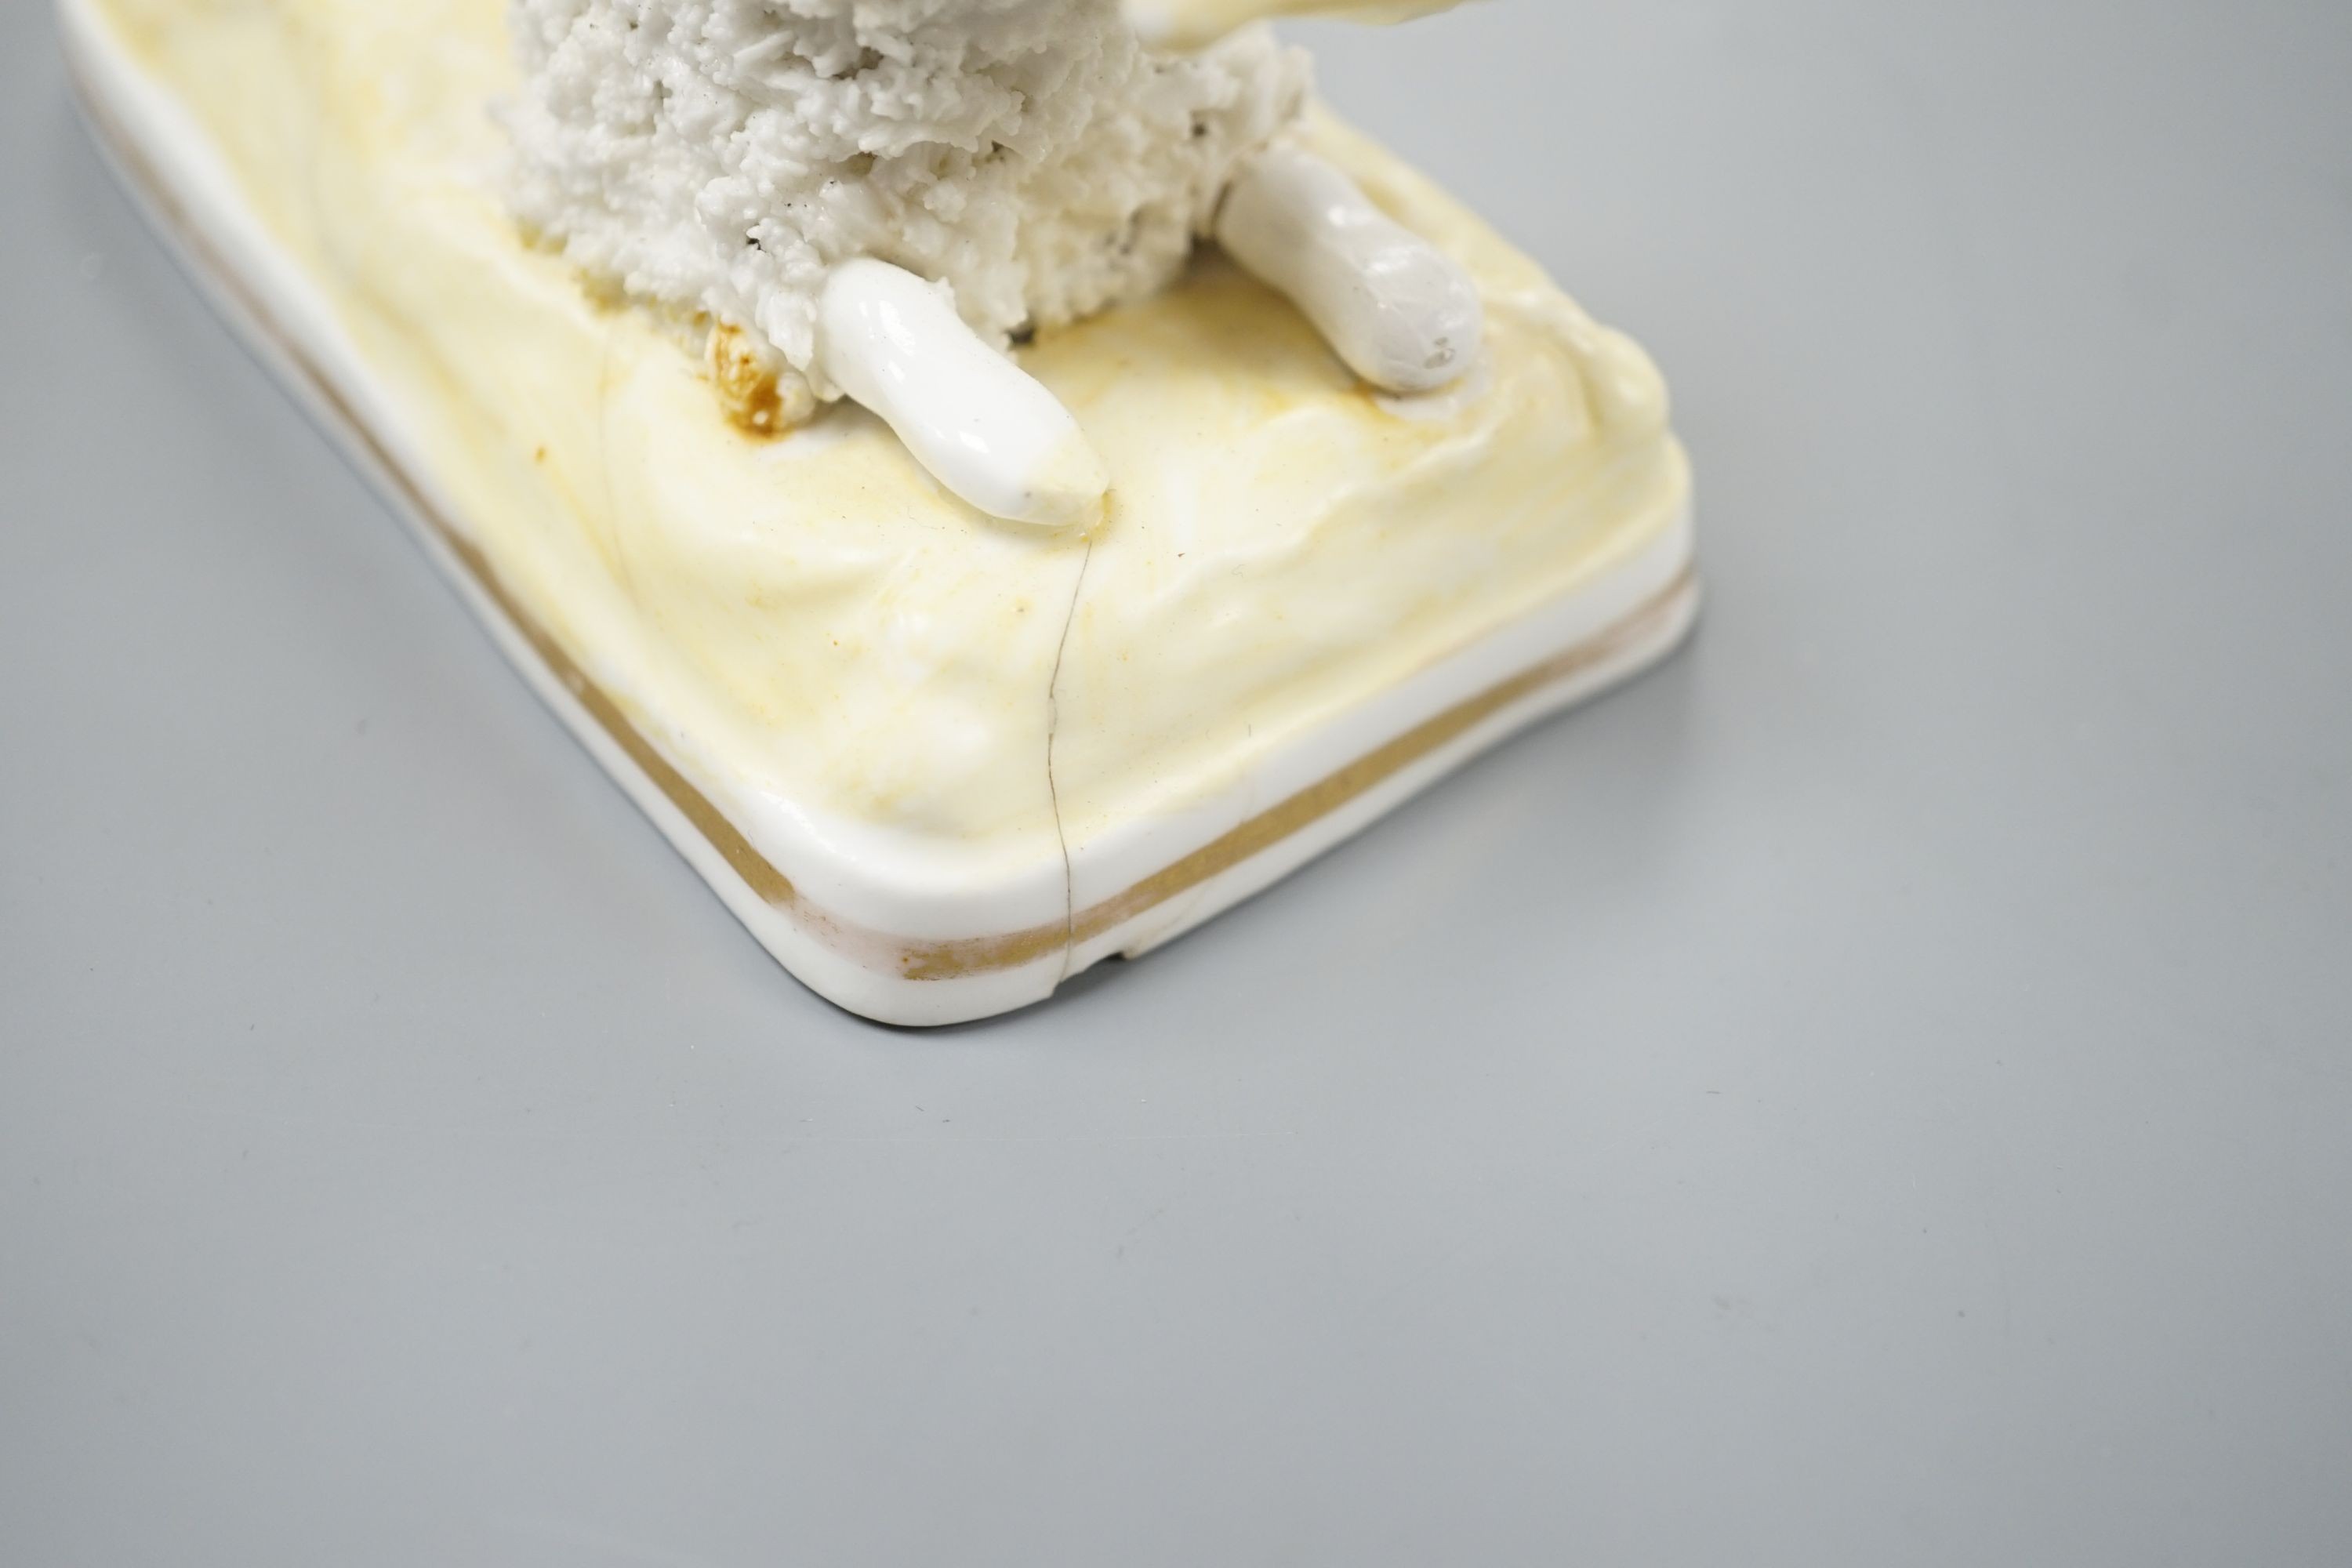 A Samuel Alcock model of a poodle grasping a bone, c.1835–50, 11.1 cm long, Cf. Dennis G.Rice Dogs in English porcelain, colour plate 64., Provenance: Dennis G.Rice collection